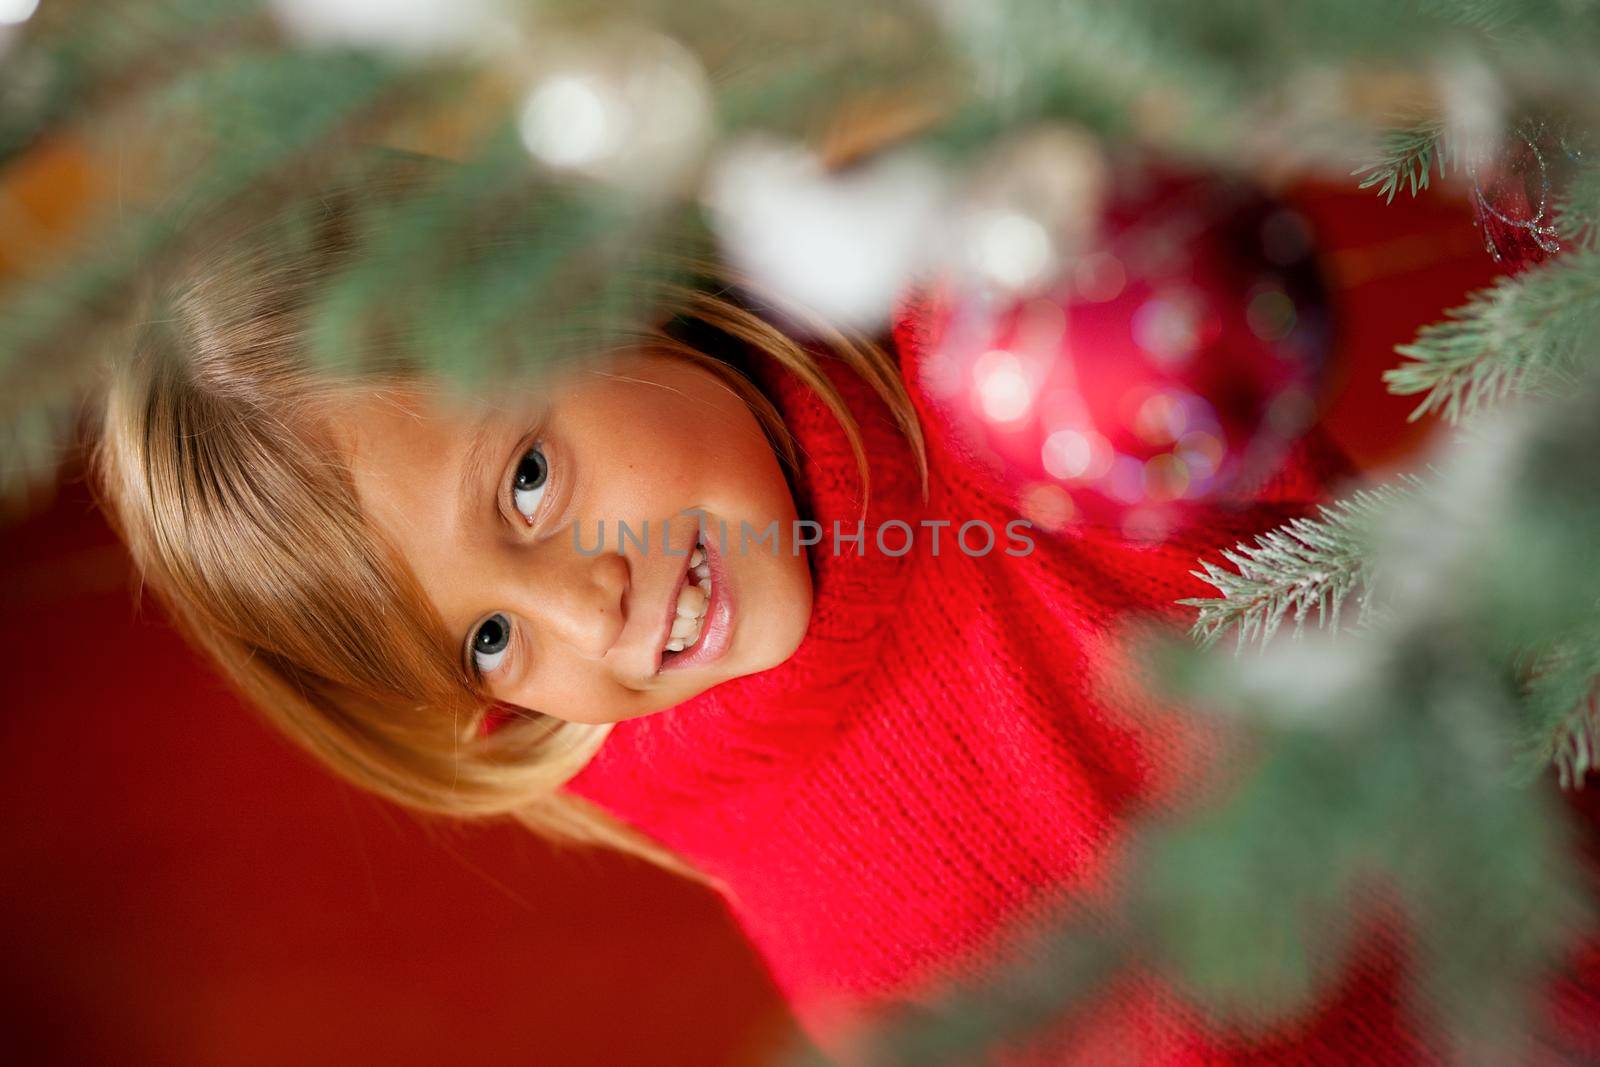 Young girl helping decorating the Christmas tree, holding some Christmas baubles in her hand (Focus on girl)